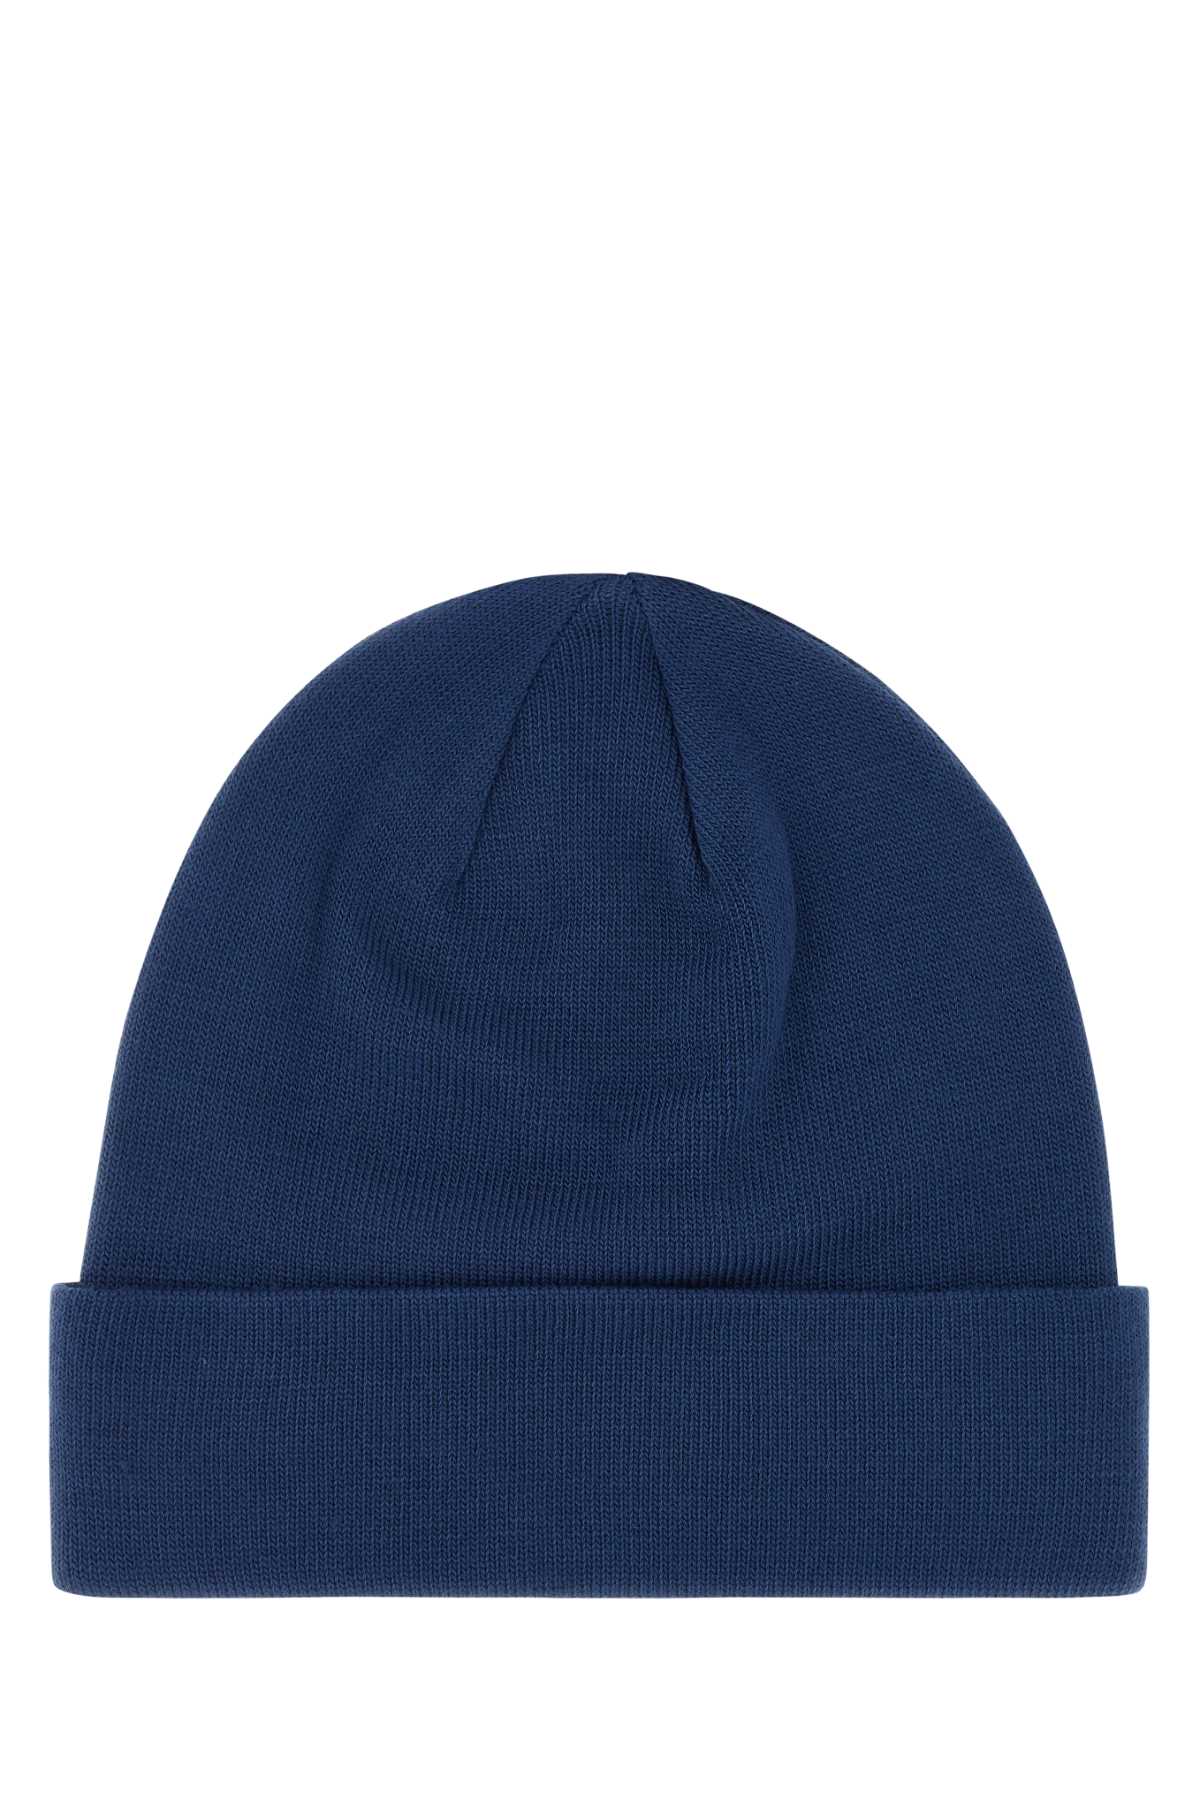 The North Face Navy Blue Stretch Polyester Blend Beanie Hat In Shady Blue